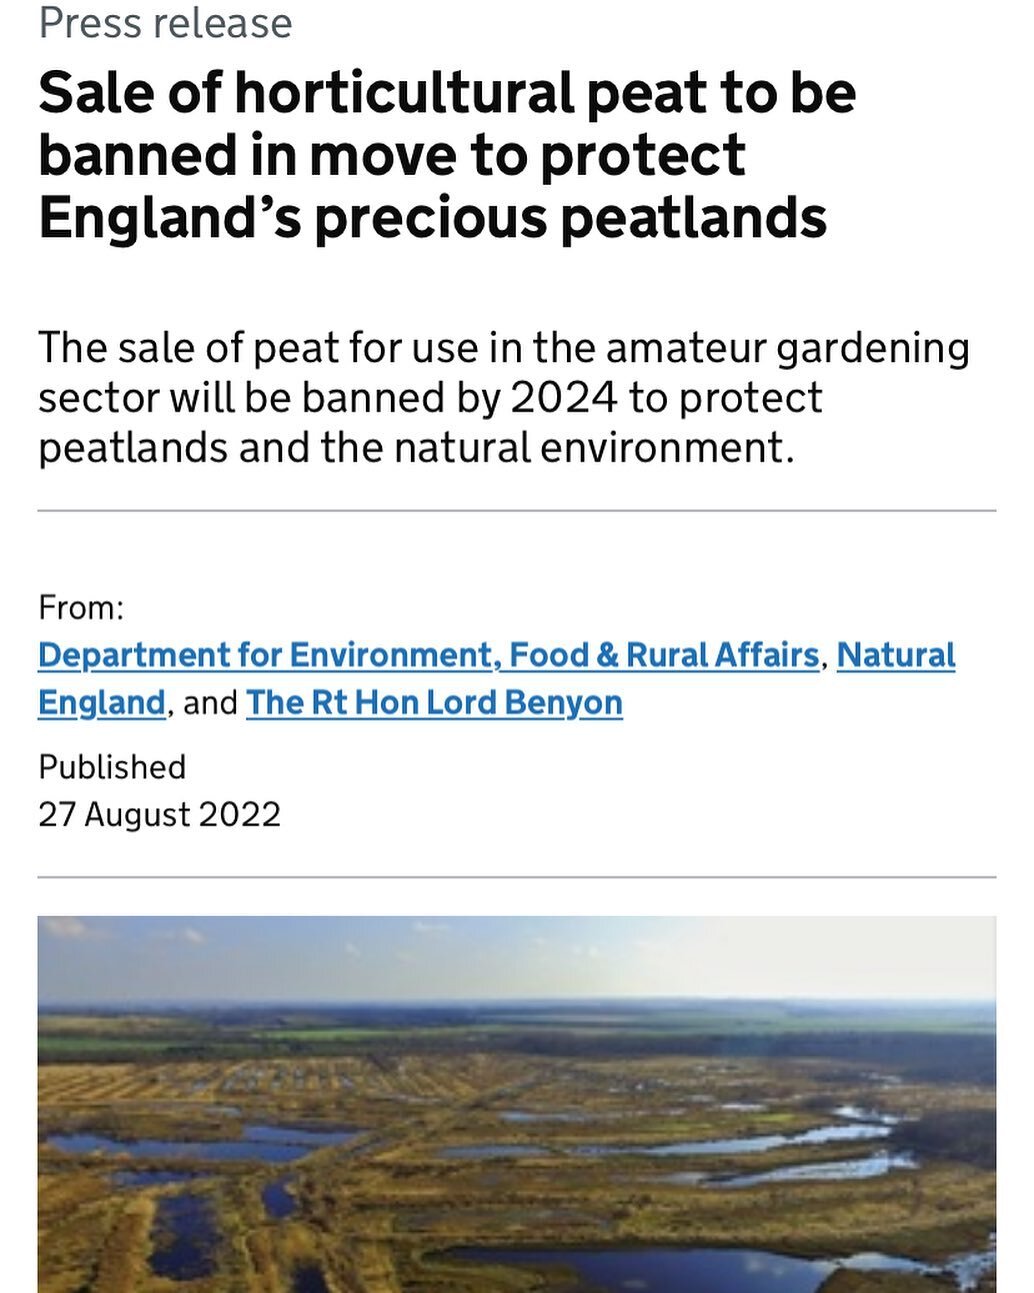 WE DID IT!!
Well almost. The sale of peat based composts to gardeners will be stopped by 2024. 
This is brilliant news, albeit it ridiculously late in the day, but now we need to agitate for the industry to stop using peat too.
More on that soon but 